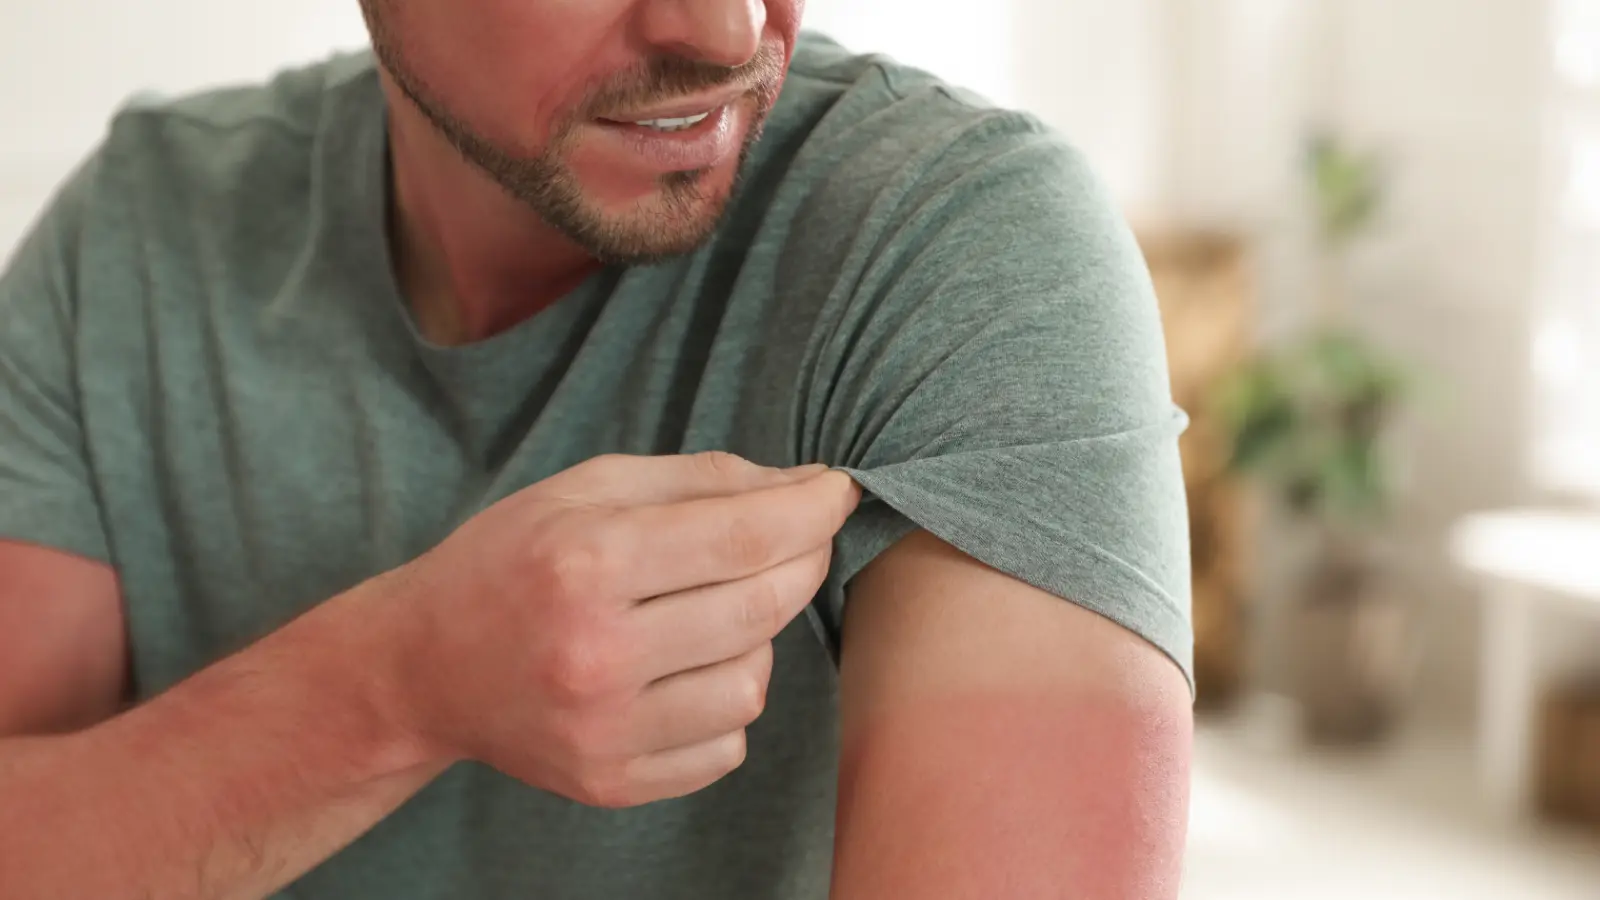 A man with sunburned skin lifting up his shirt sleeve.